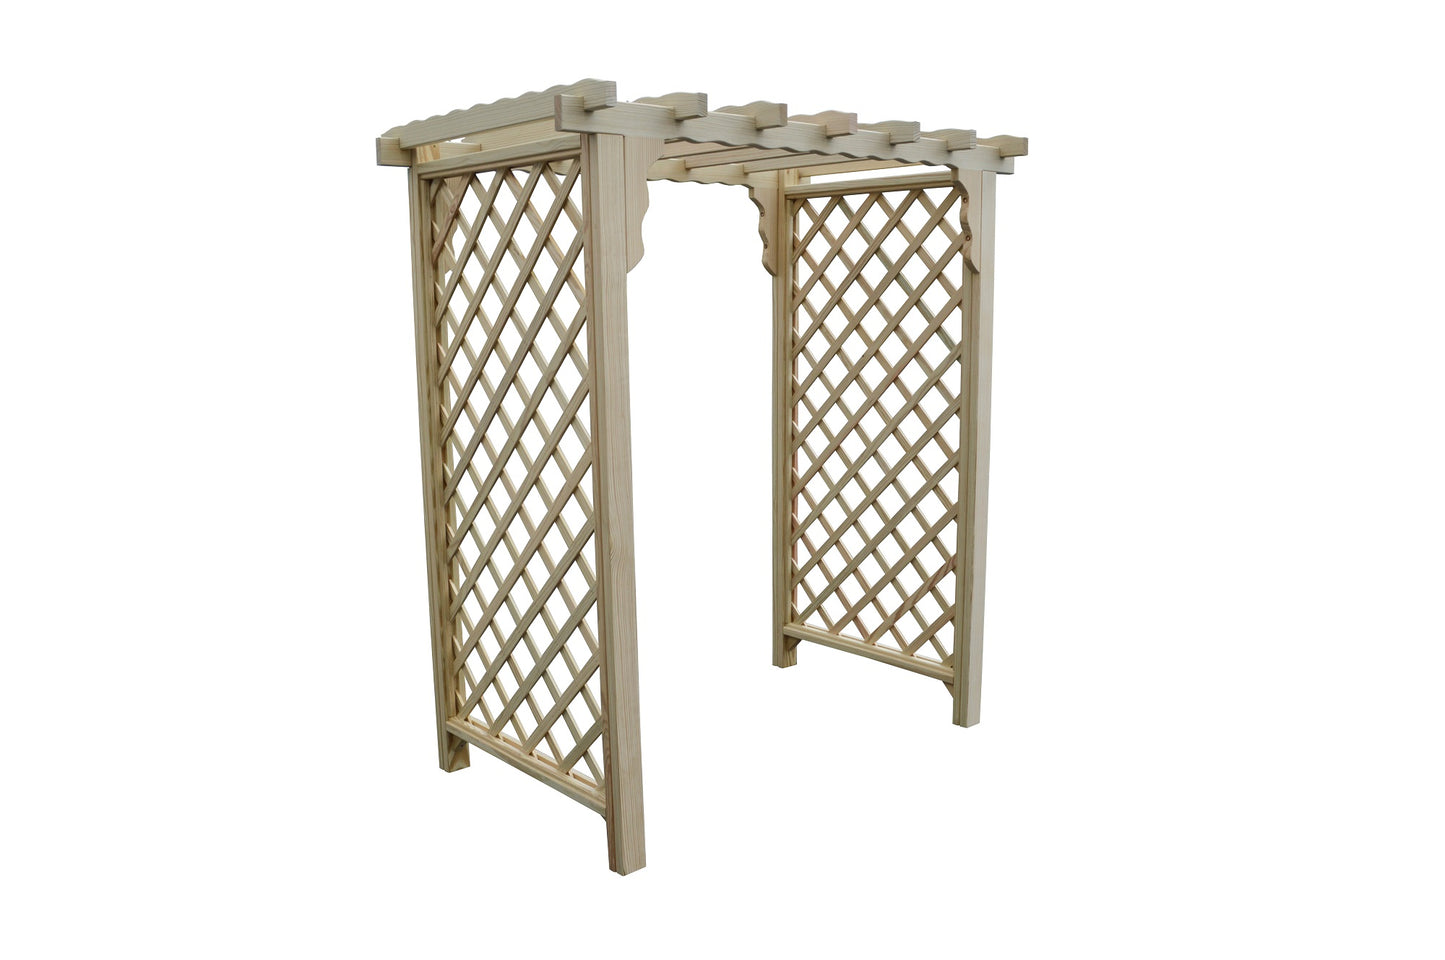 A&L FURNITURE CO. 6' Covington Pressure Treated Pine Arbor - LEAD TIME TO SHIP 10 BUSINESS DAYS